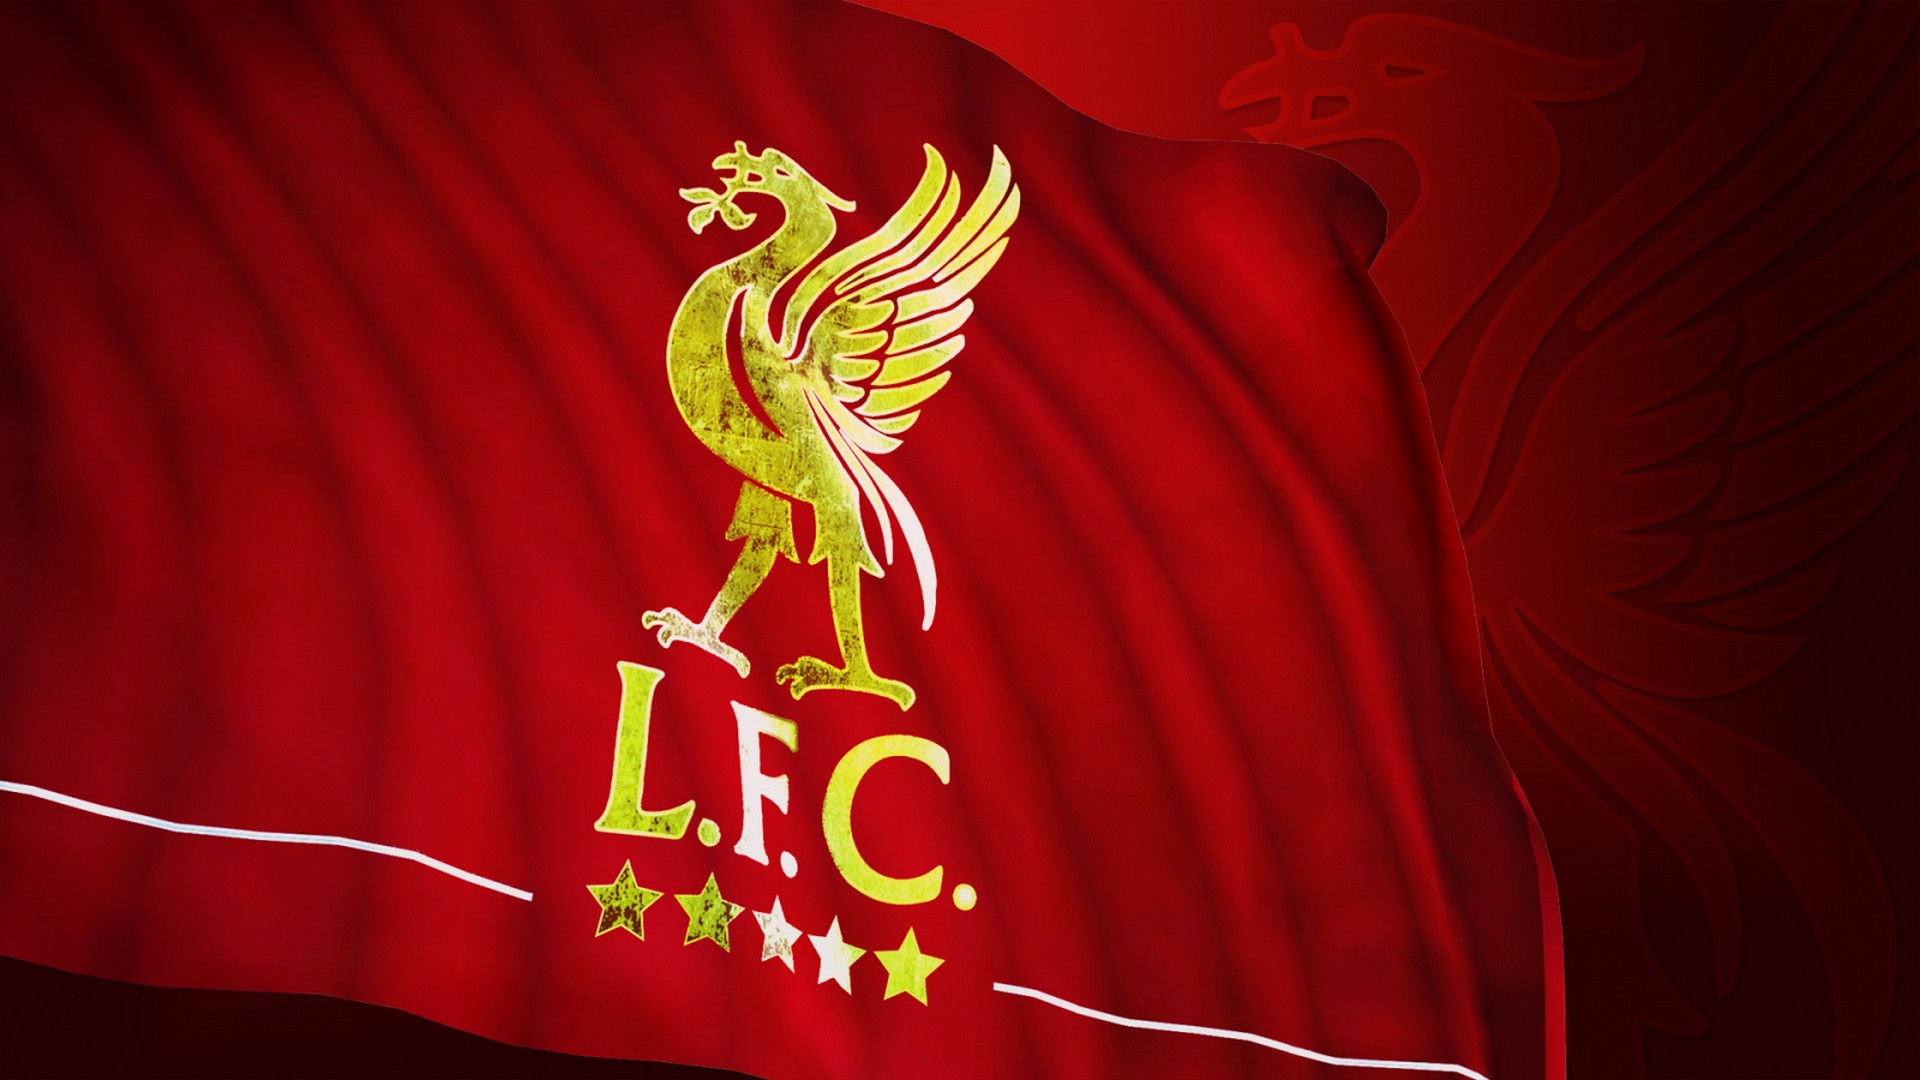 Liverpool Desktop Wallpaper With Resolution 1920X1080 pixel. You can make this wallpaper for your Mac or Windows Desktop Background, iPhone, Android or Tablet and another Smartphone device for free